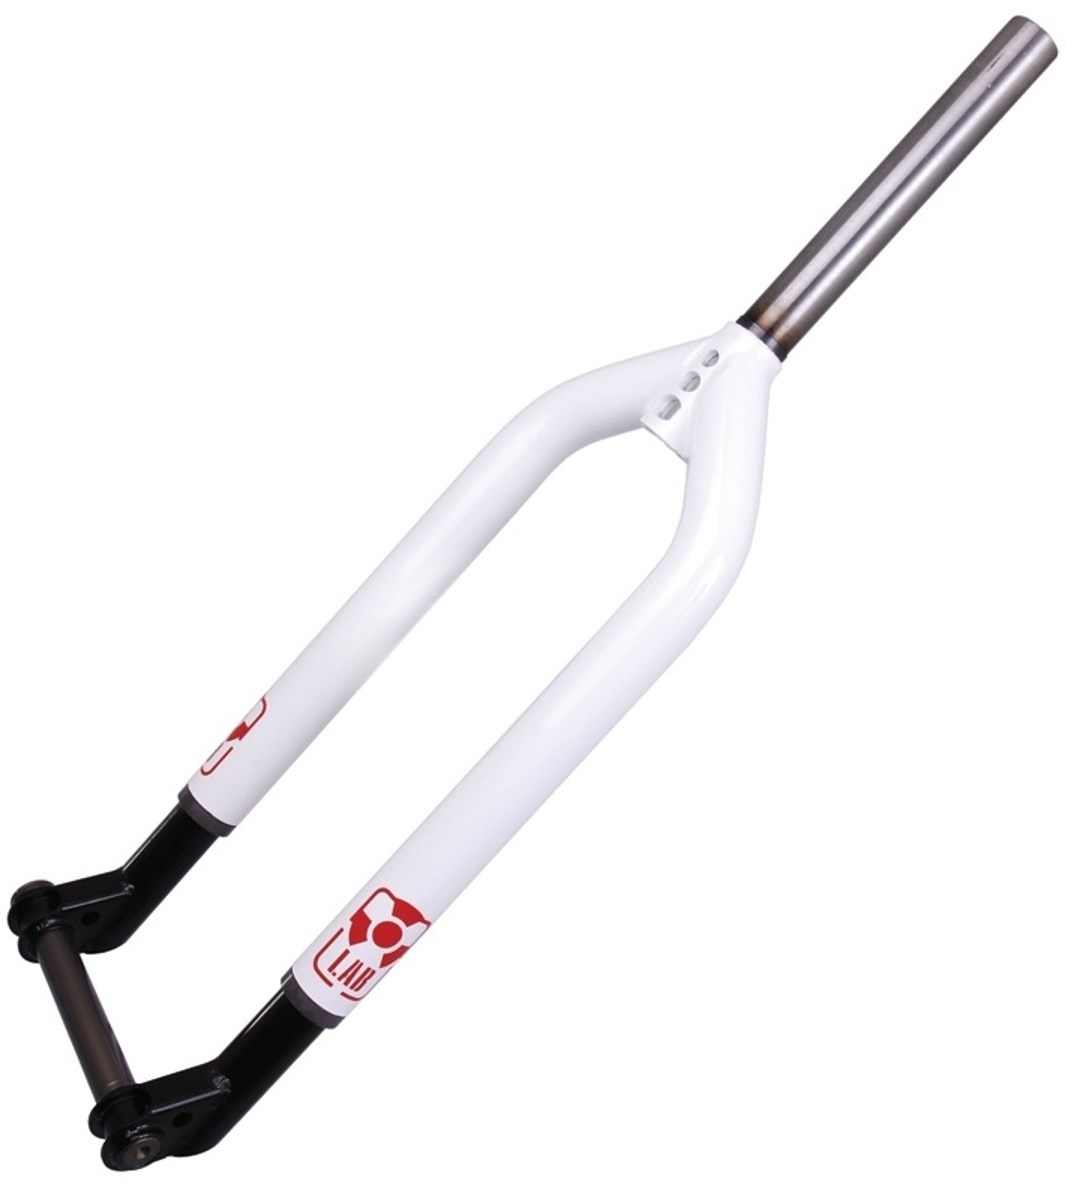 Atomlab General Issue Dirt Jump Fork 2011 product image